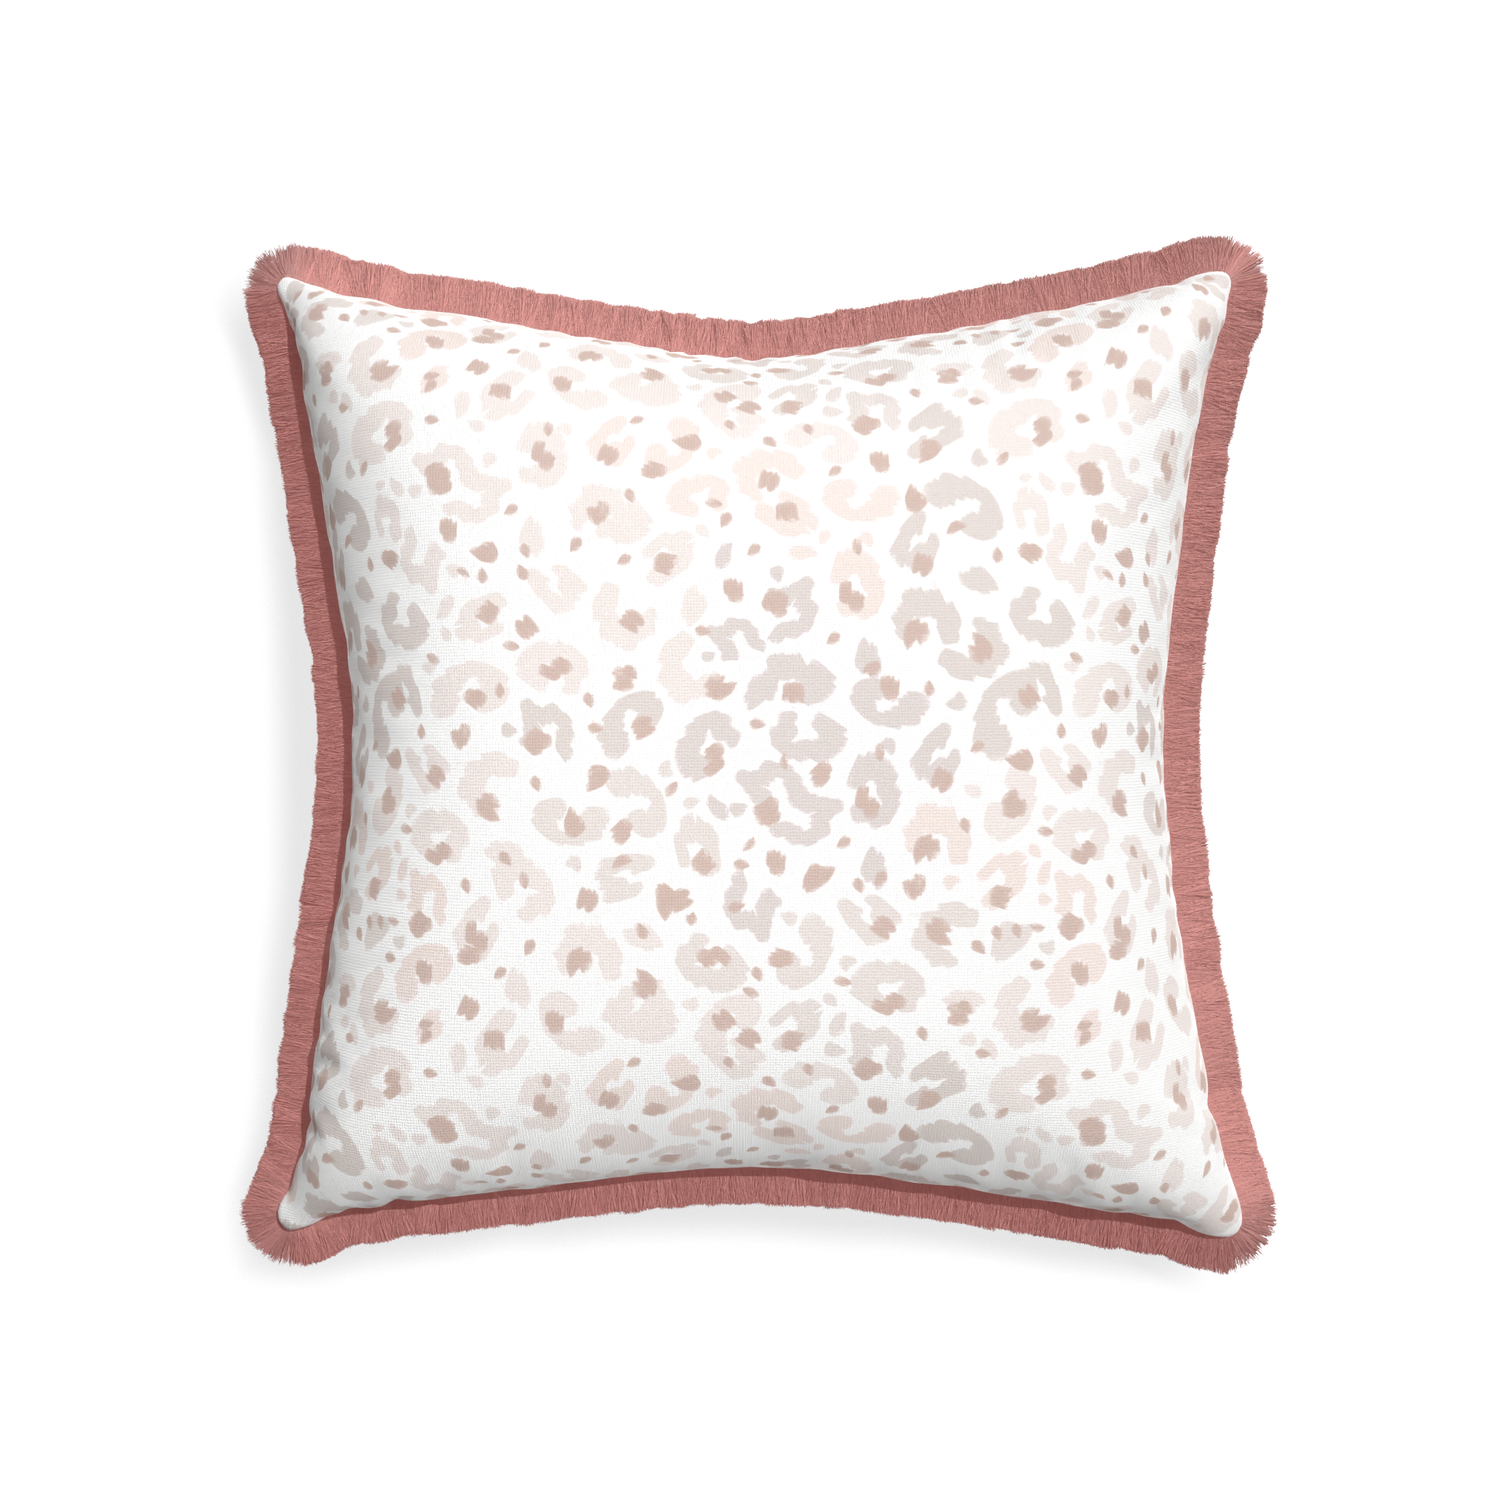 22-square rosie custom pillow with d fringe on white background